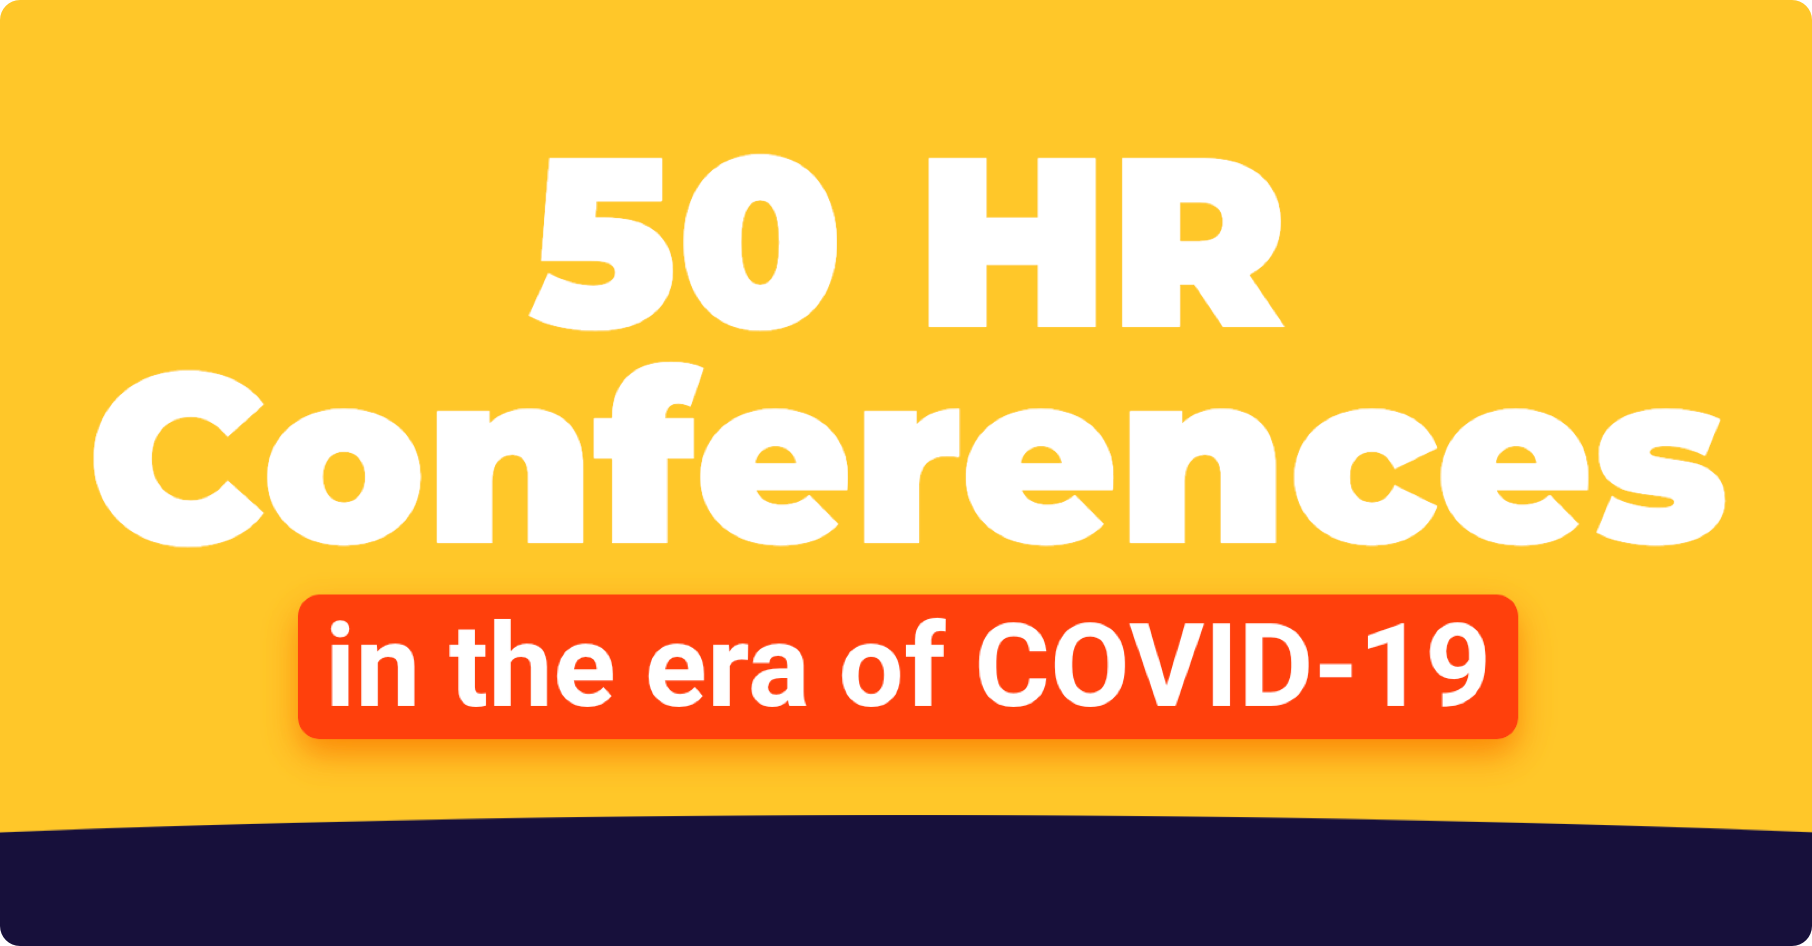 A comprehensive look into HR conferences in the era of Covid19